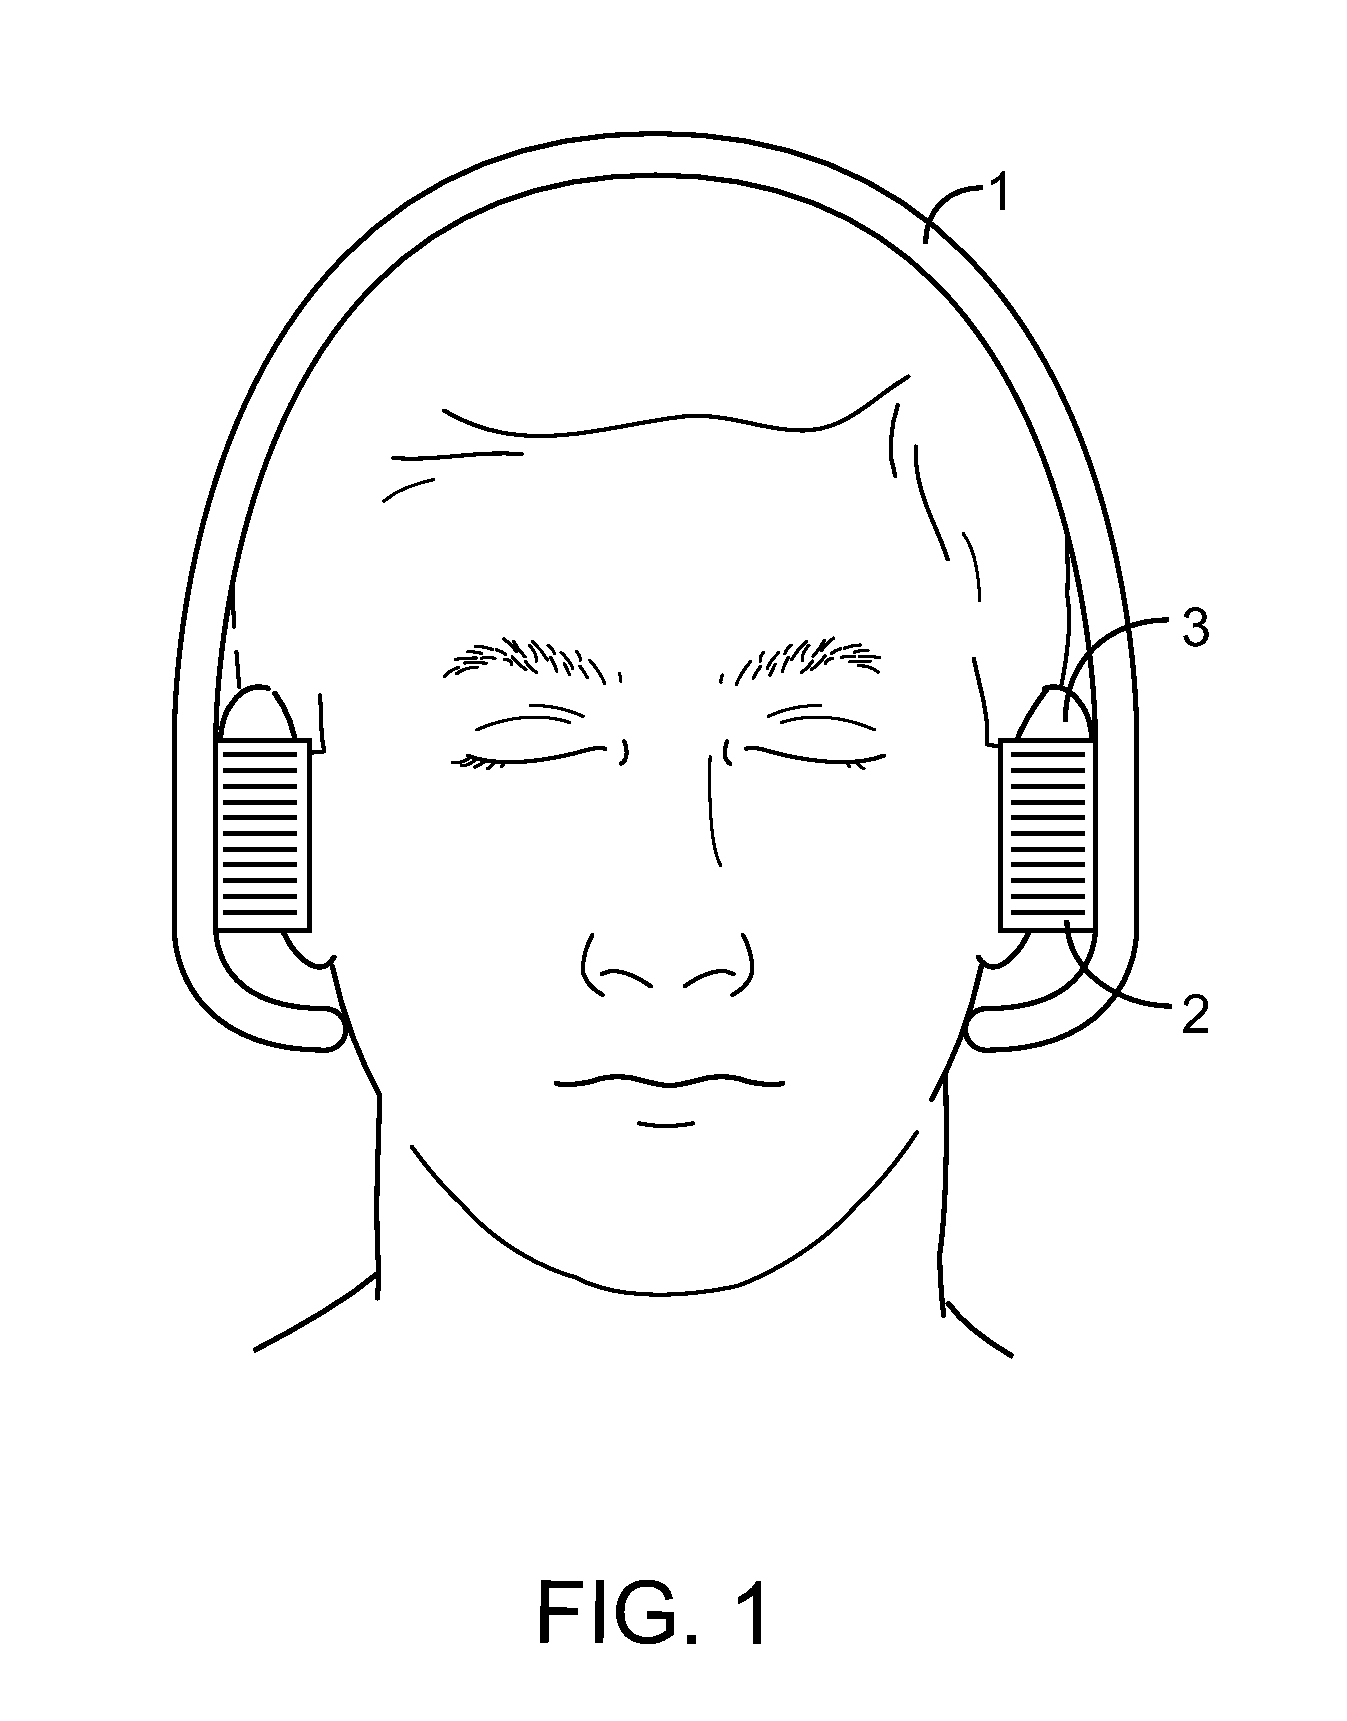 System and Method for the Simultaneous Bilateral Integrated Tympanic Drug Delivery and Guided Treatment of Target Tissues Within the Ears